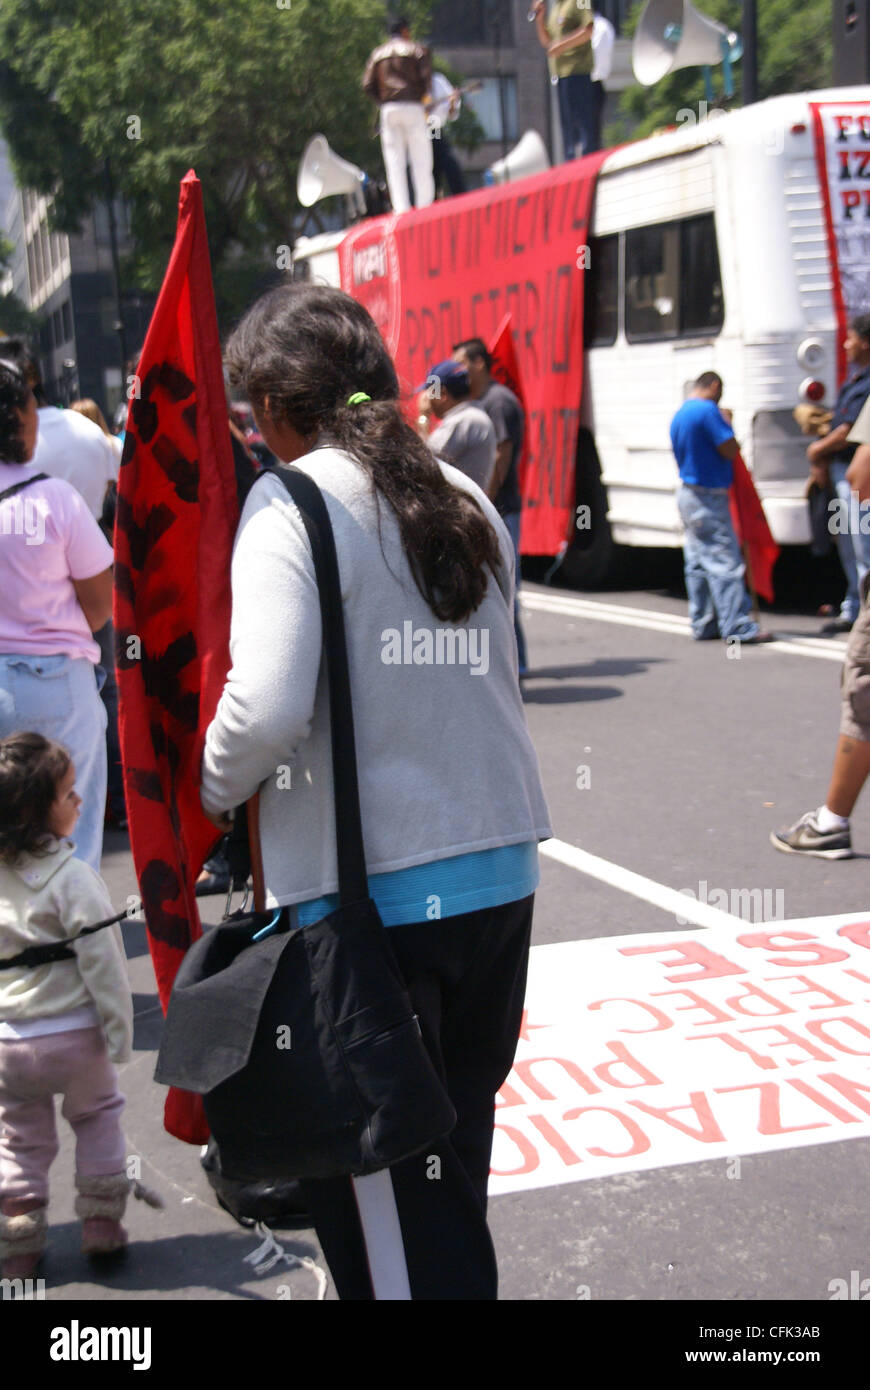 Woman holding red flag at a demonstration, Mexico City, Mexico  Stock Photo